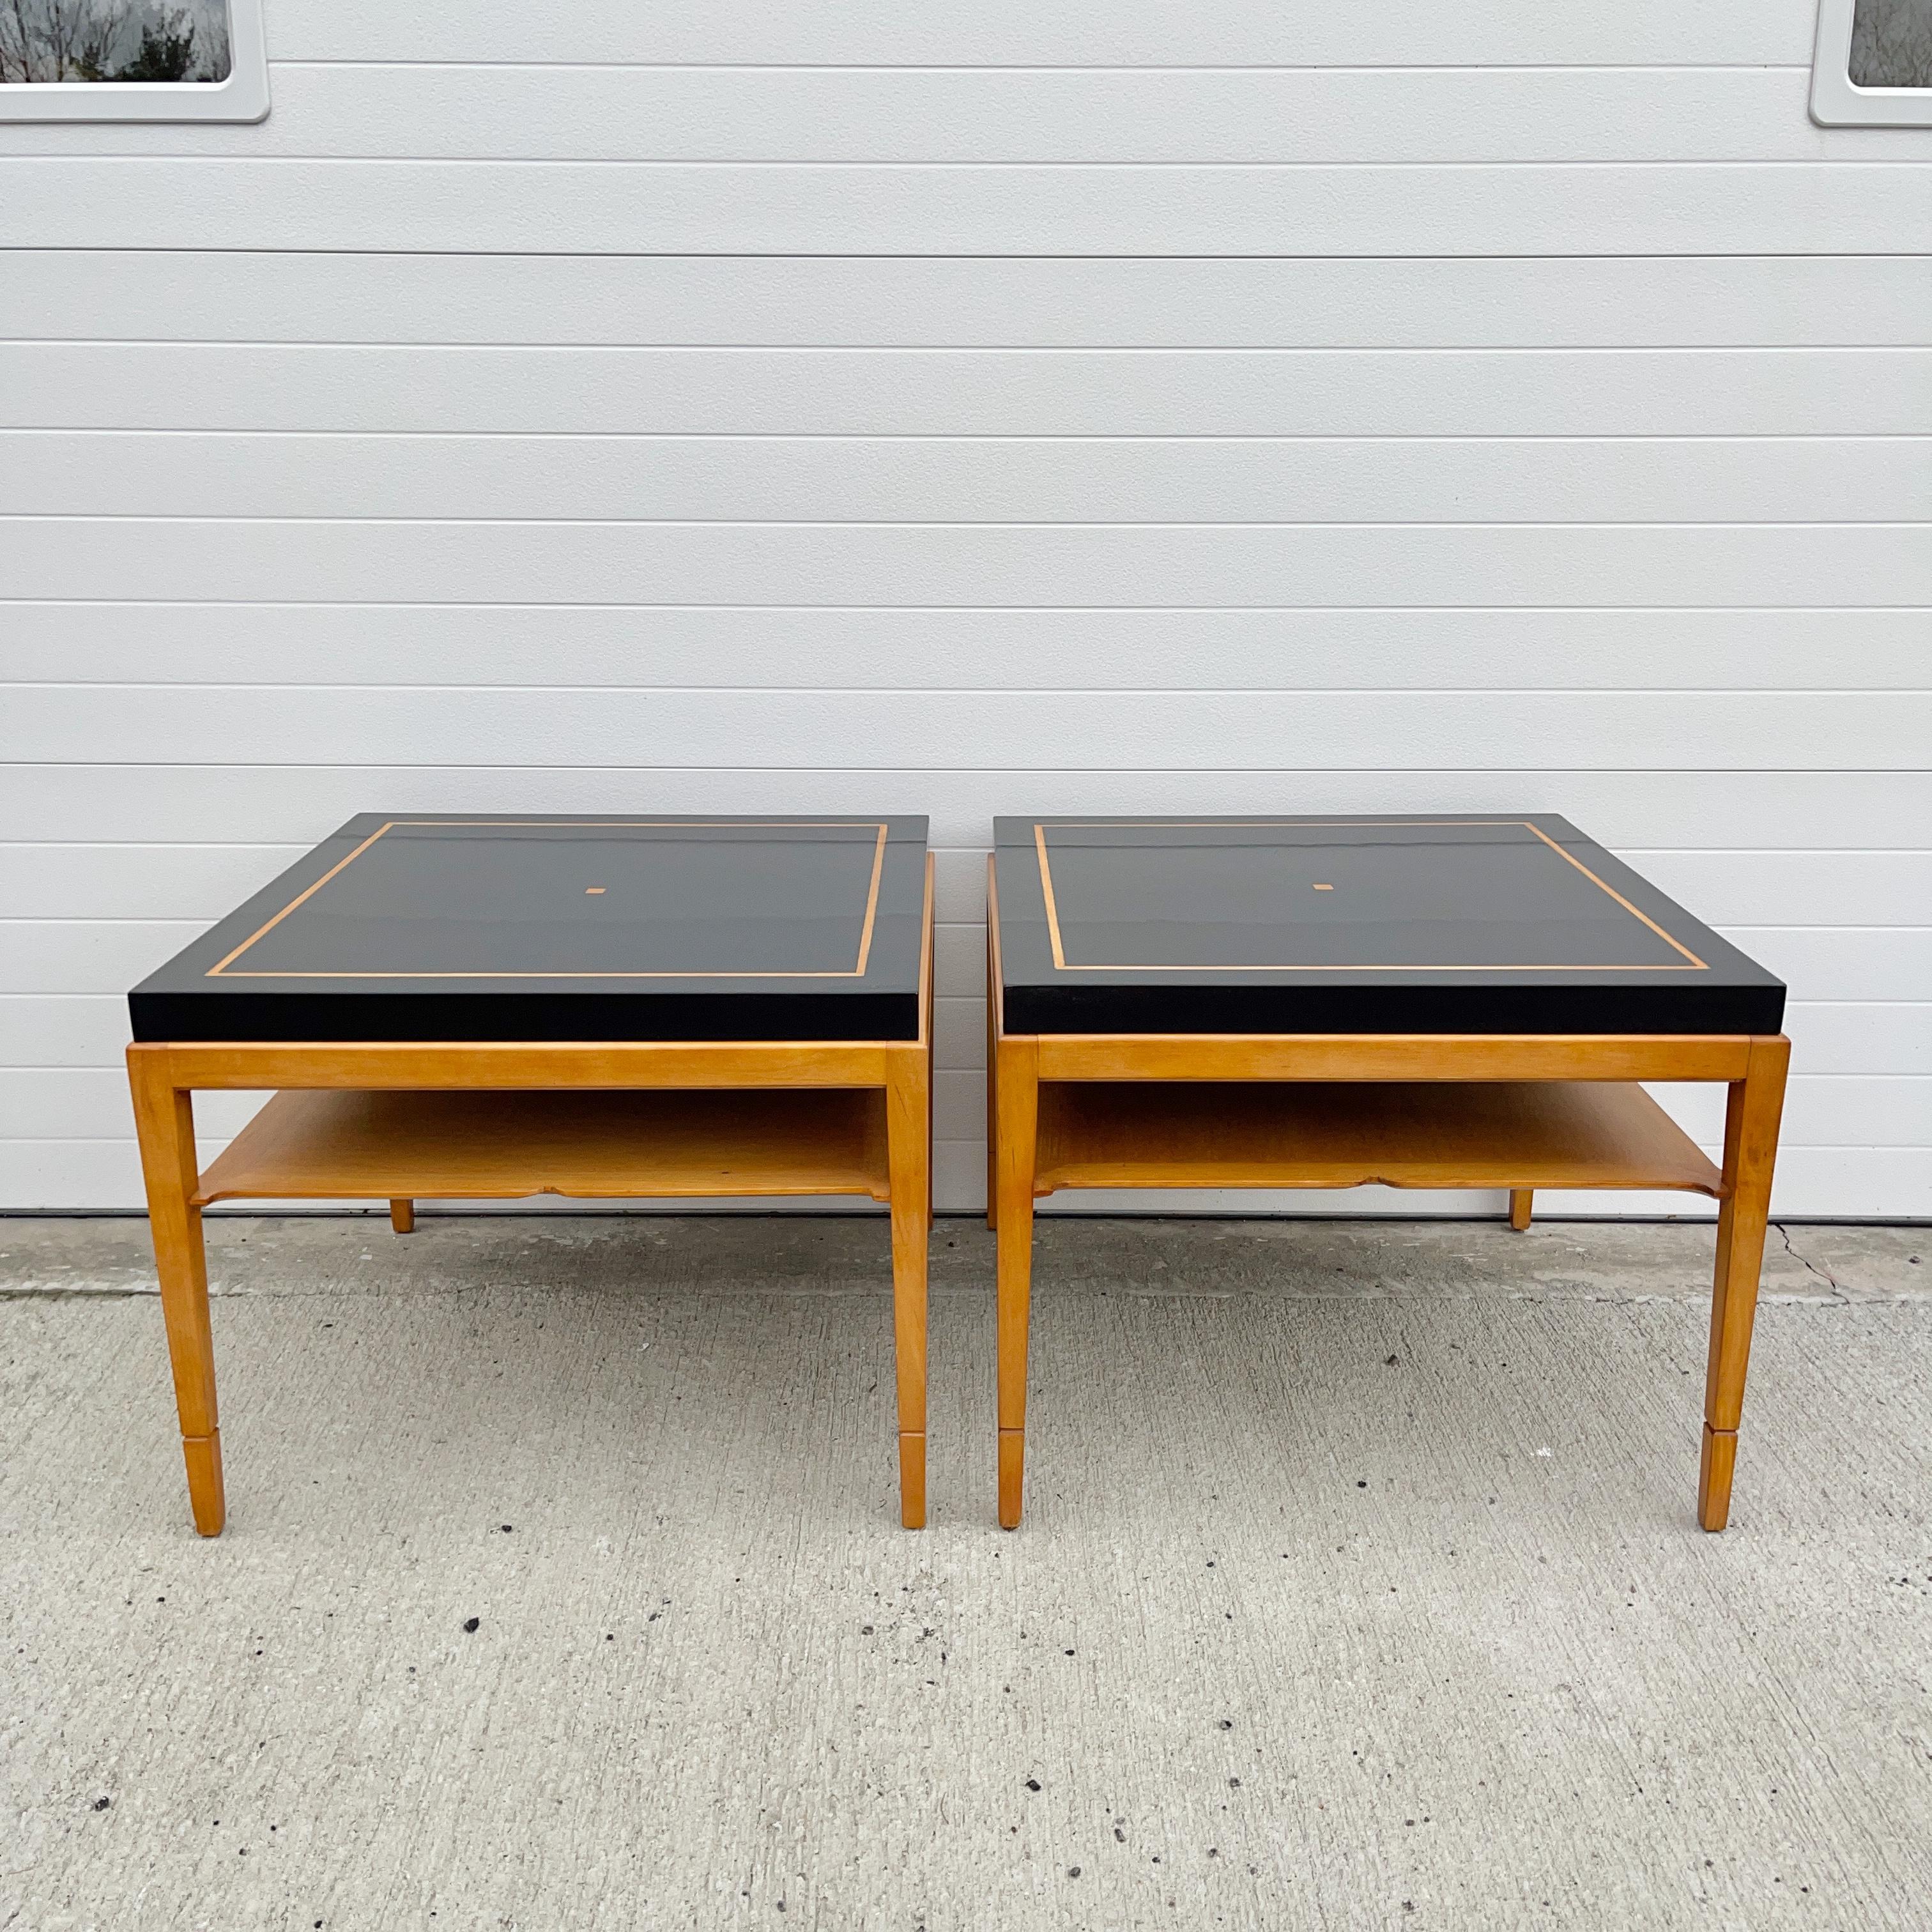 Elegant pair of side or end tables by Tommi Parzinger of square form, ebonized walnut top with caramel colored inlay and body made of holly with stylized hand carved fixed shelf and tapered legs.
These are equally beautiful when viewed from